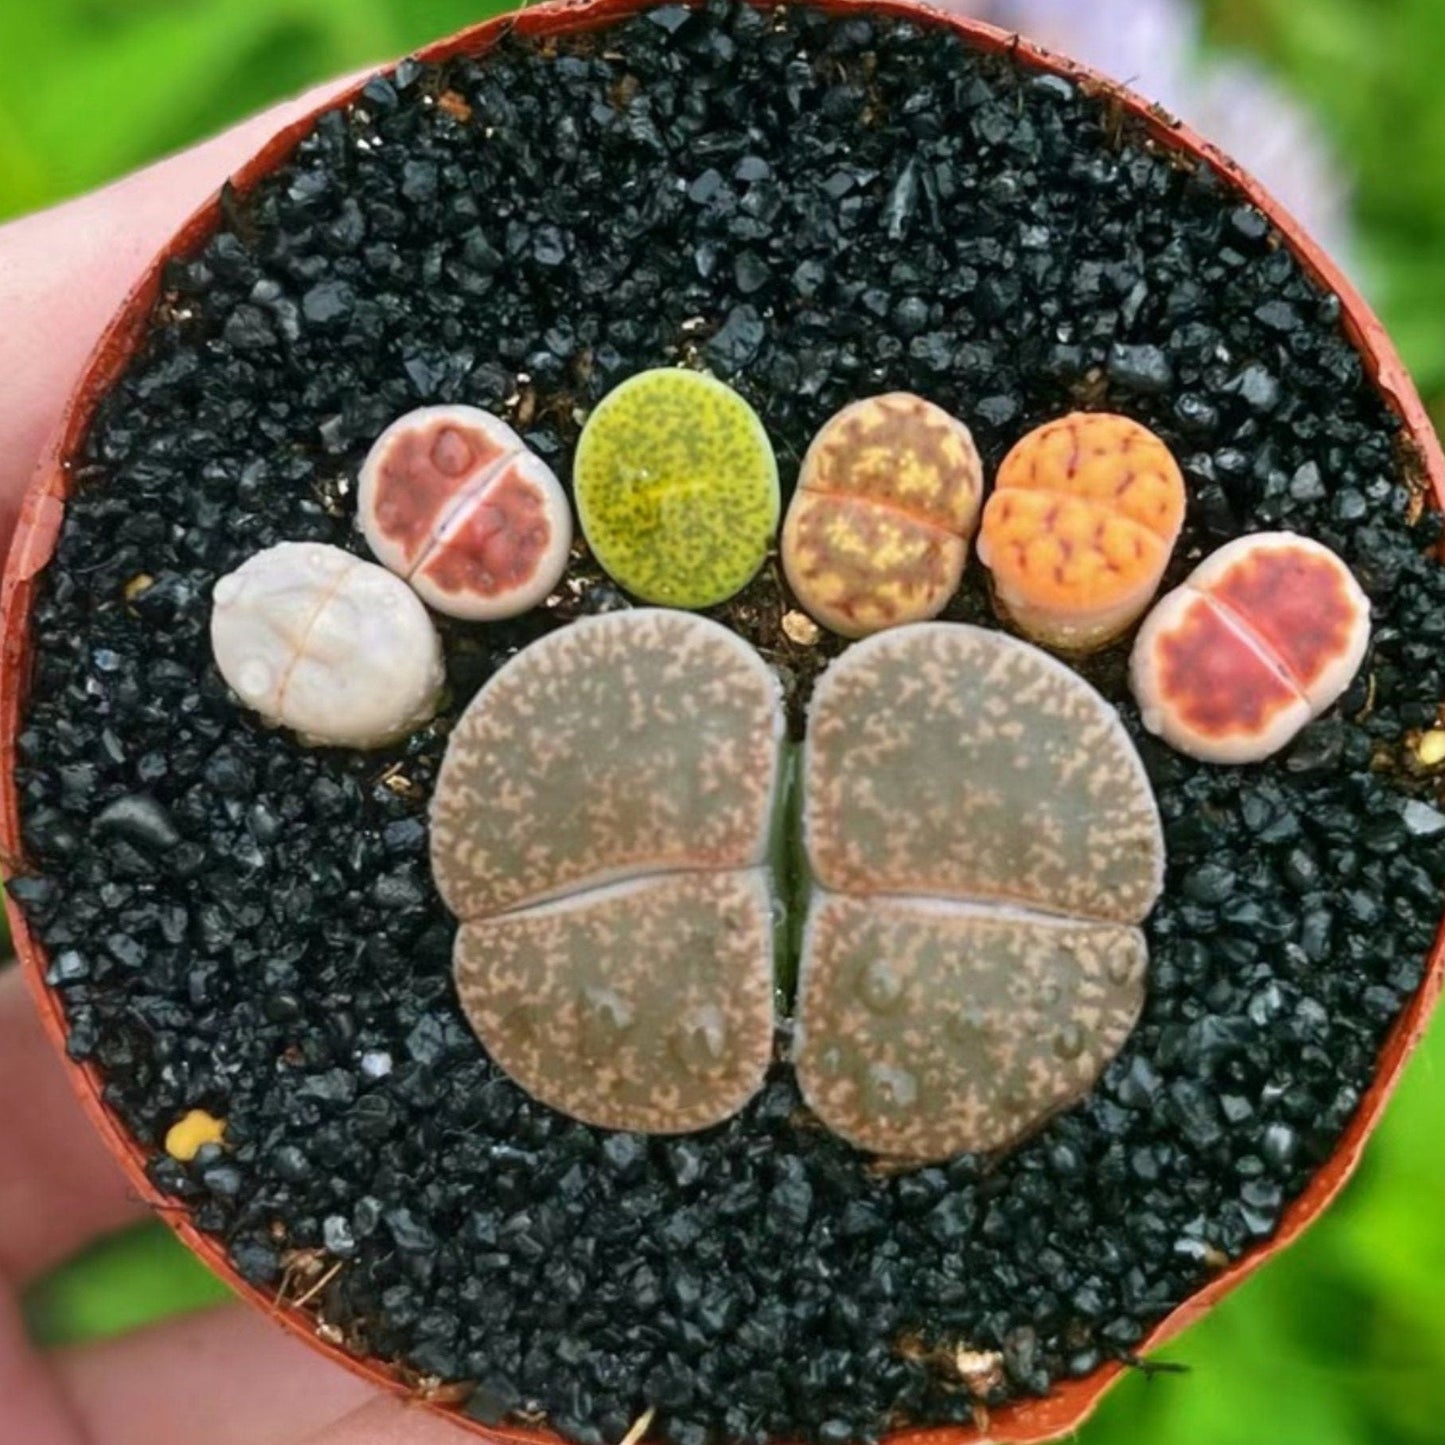 Live Plant - 1 double-head(0.8") + 6 small(0.5") lithops "Double Foot-Shaped"